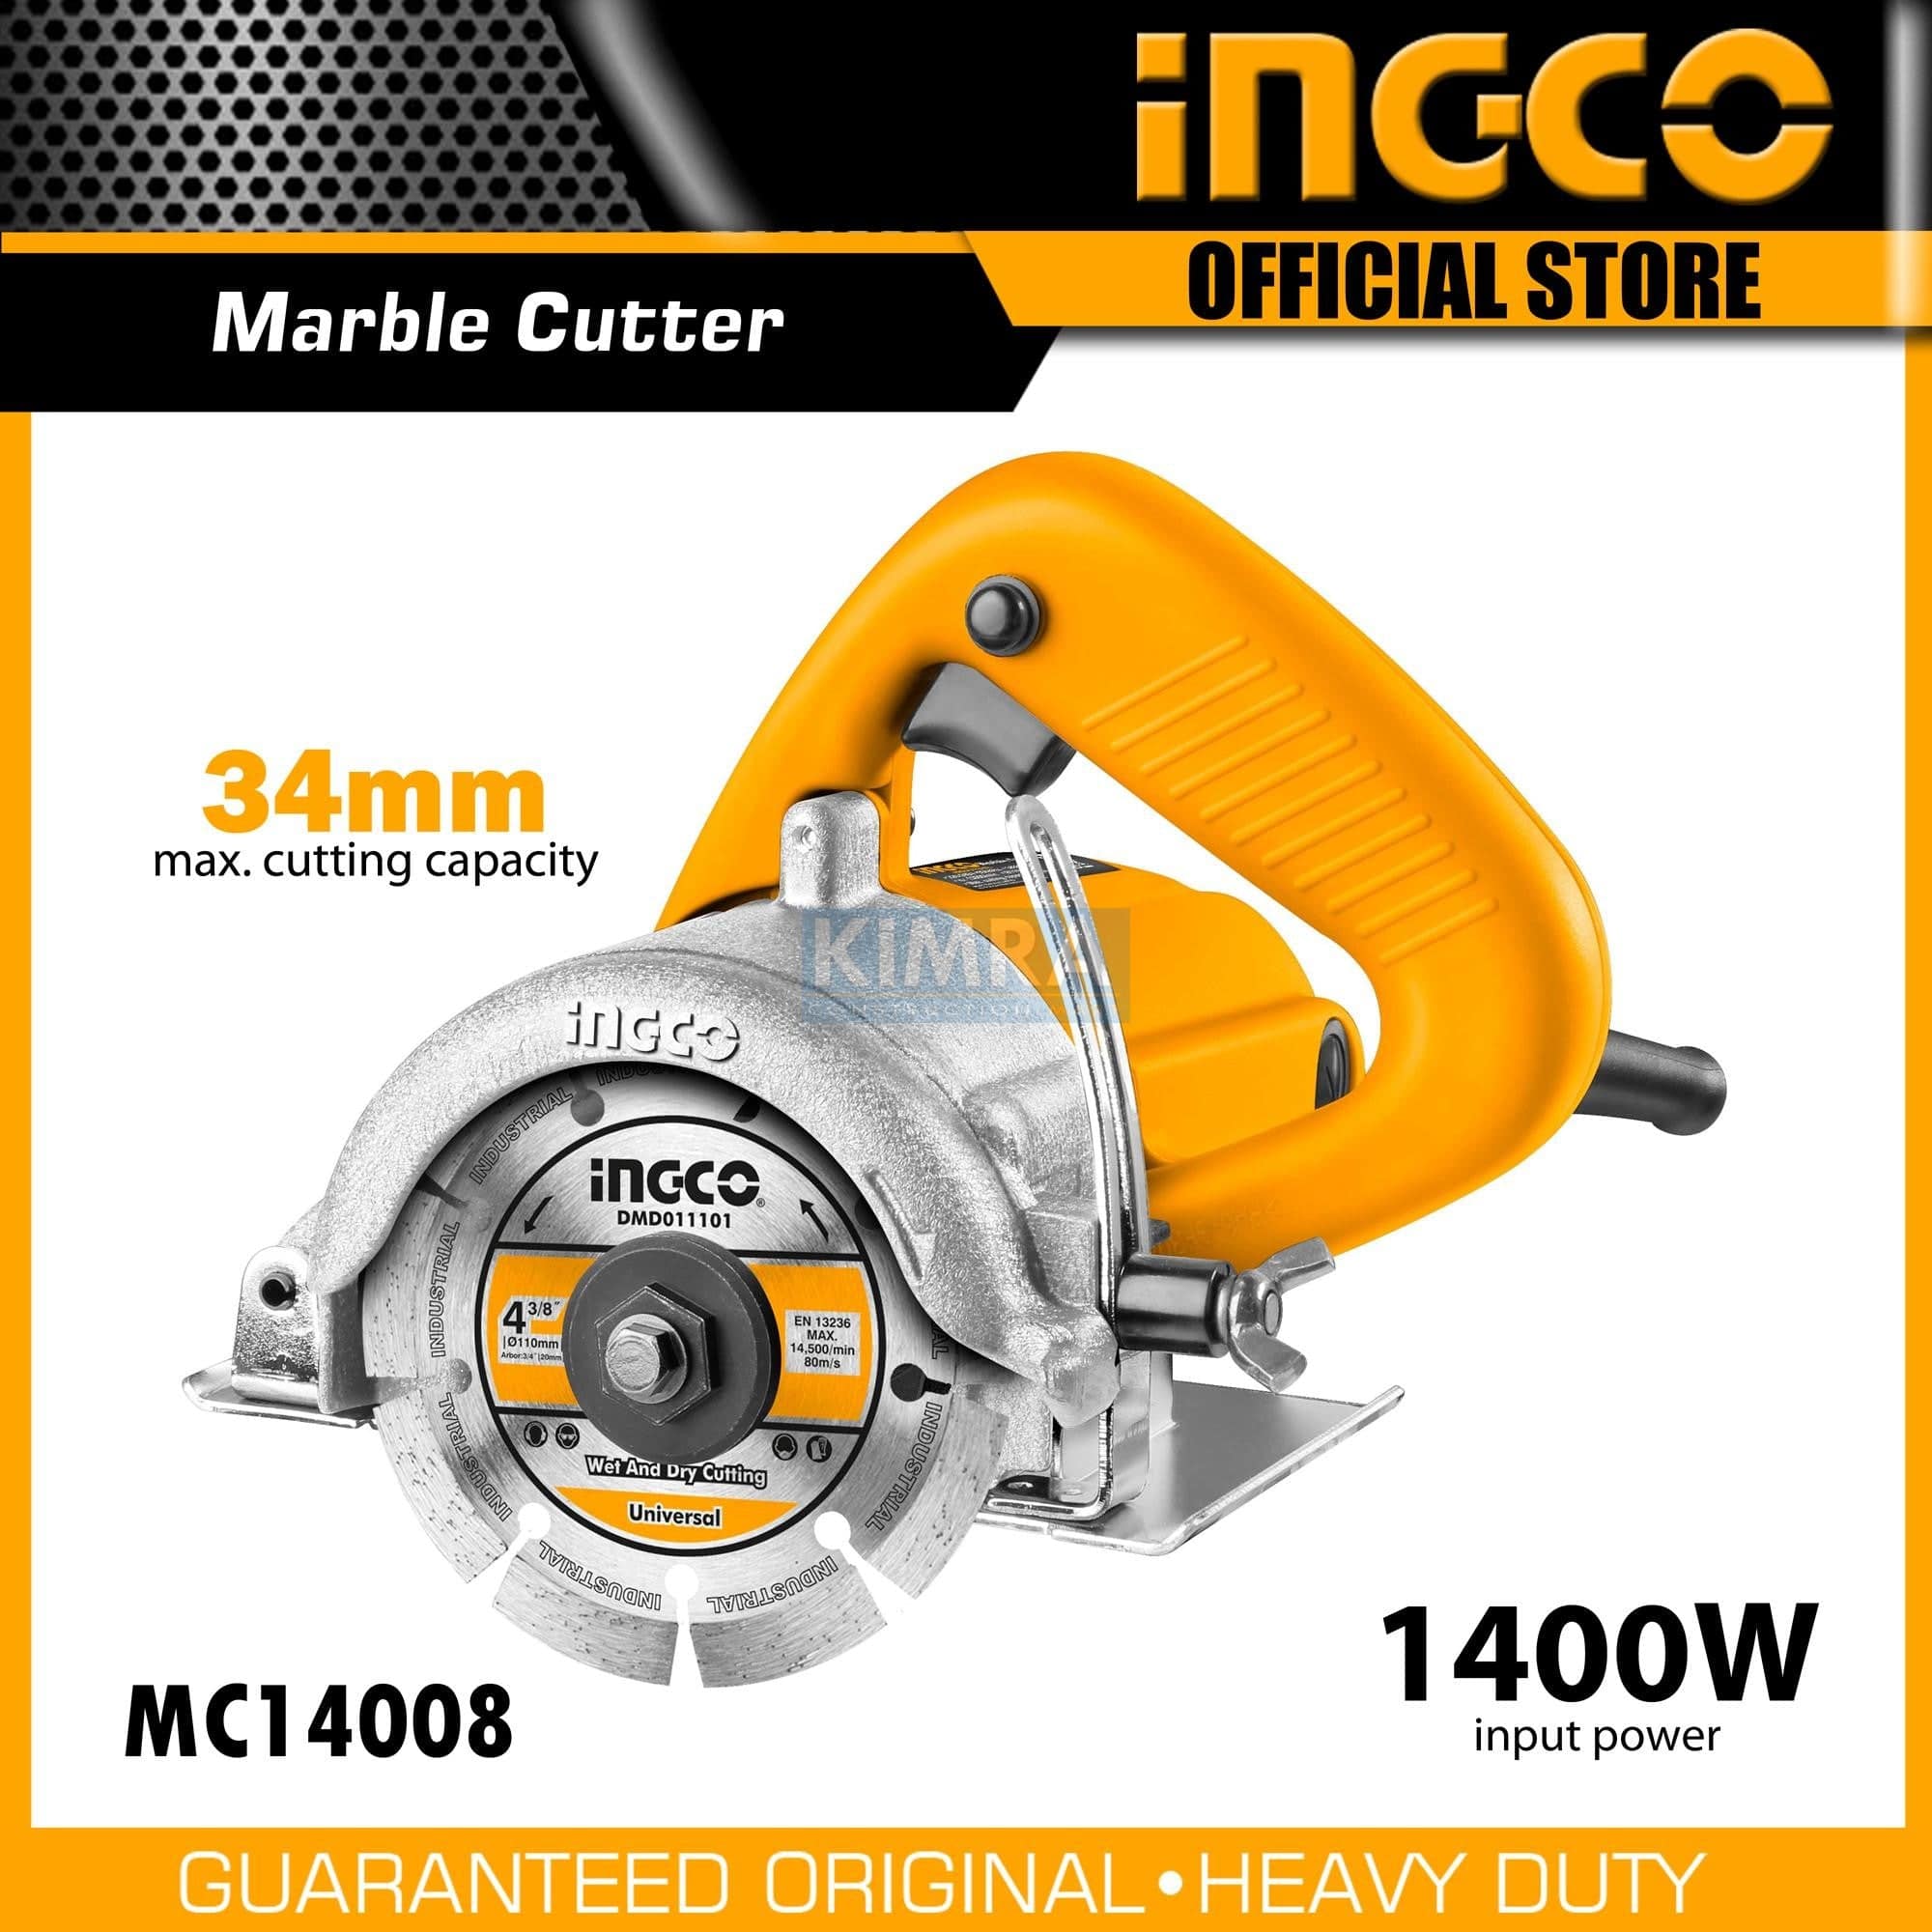 Ingco Marble Cutter 1400W - MC14008 | Shop Online in Accra, Ghana - Supply Master Marble & Tile Cutter Buy Tools hardware Building materials